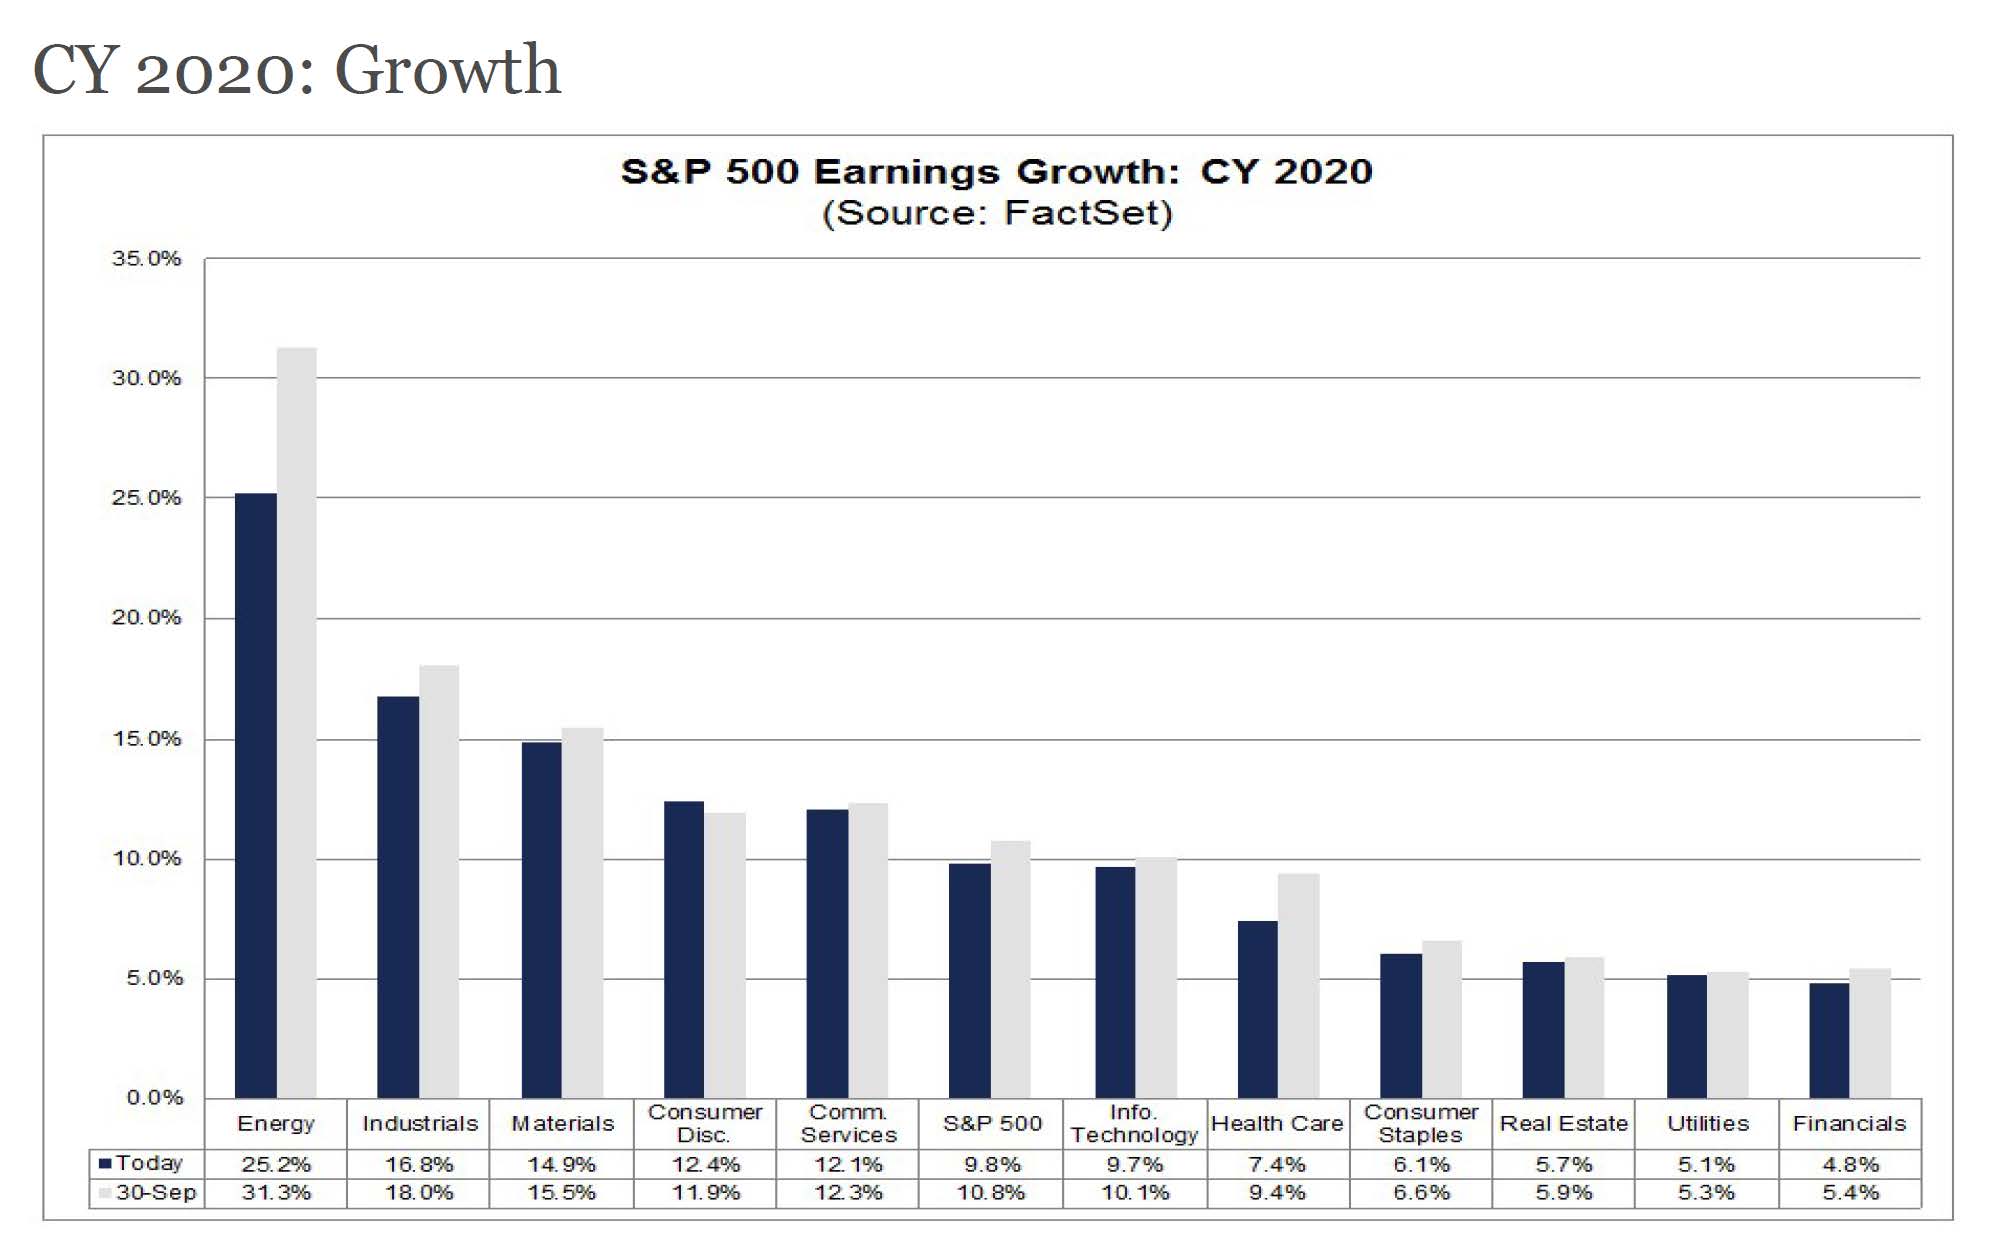 11-9-19 Earnings Growth for 2020 by Sector - Forecast